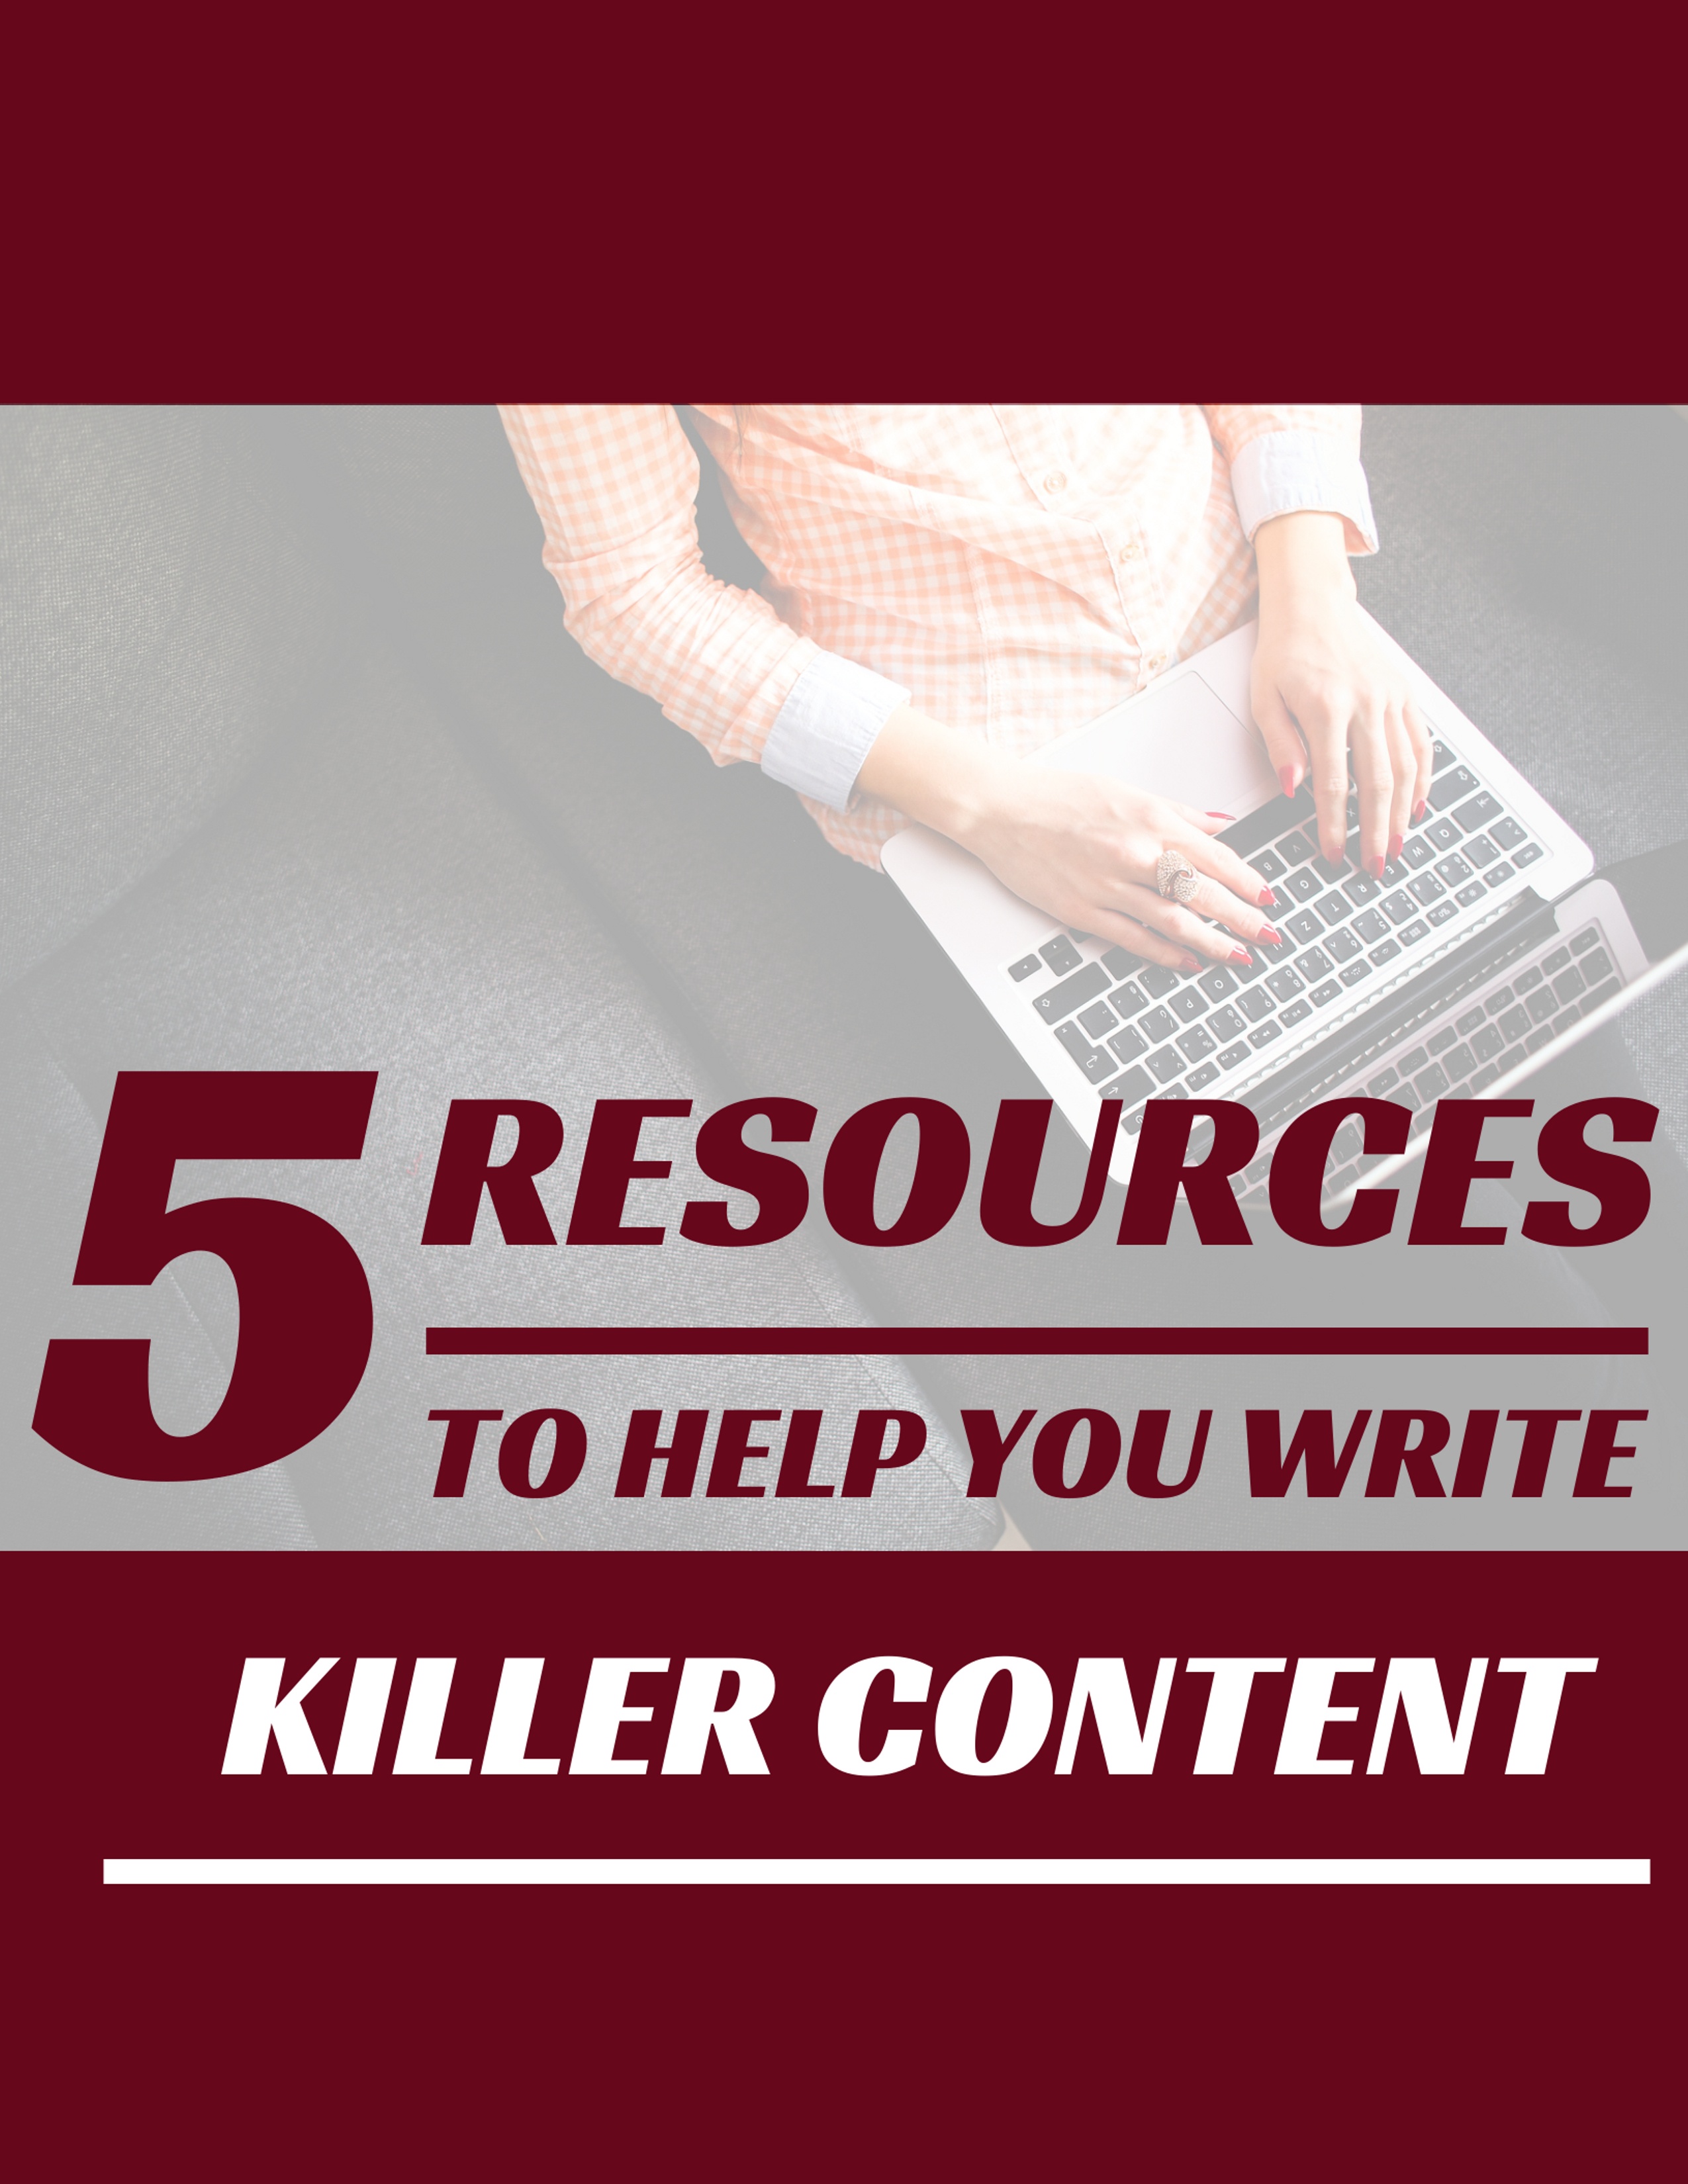 5 resources to help you write killer content